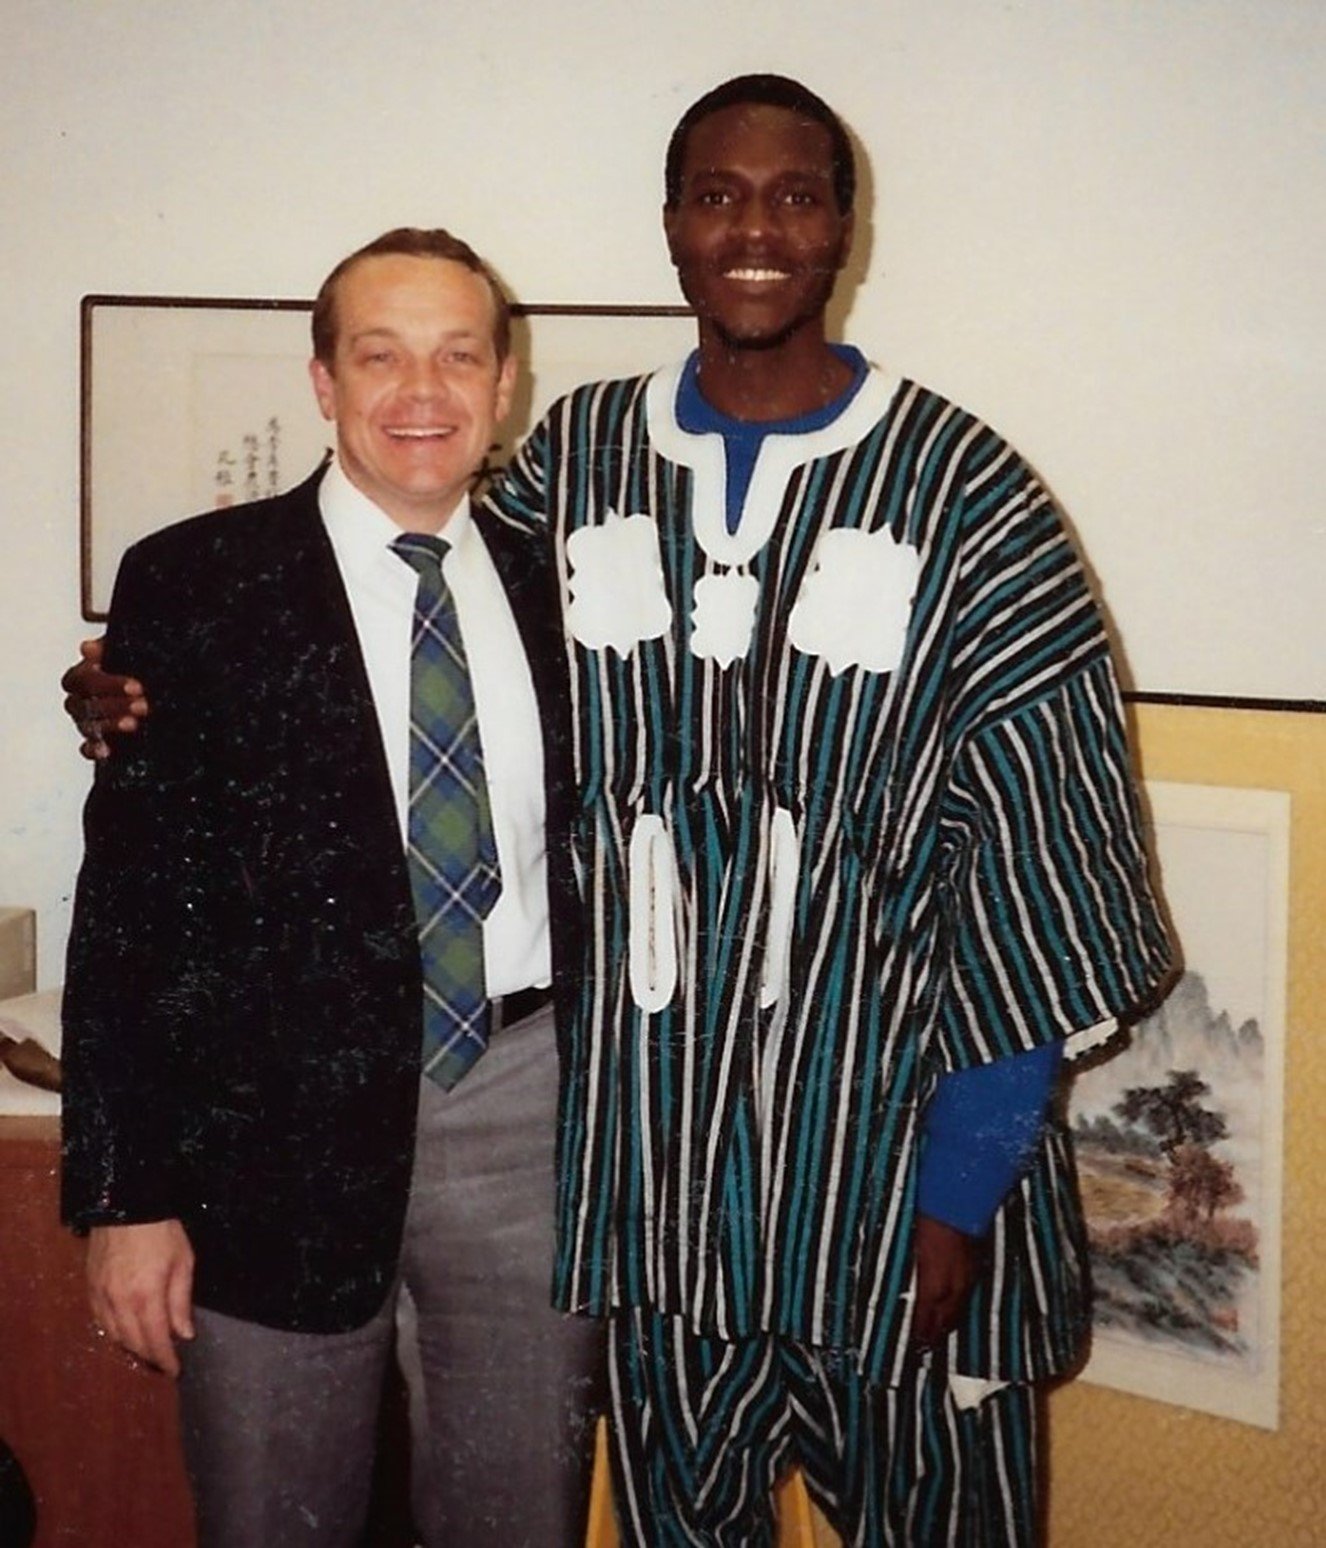  Solomon Sule-Saa, Mission to the USA trip in 1992, with Jeff Ritchie,  Associate for International Evangelism, PCUSA General Assembly 